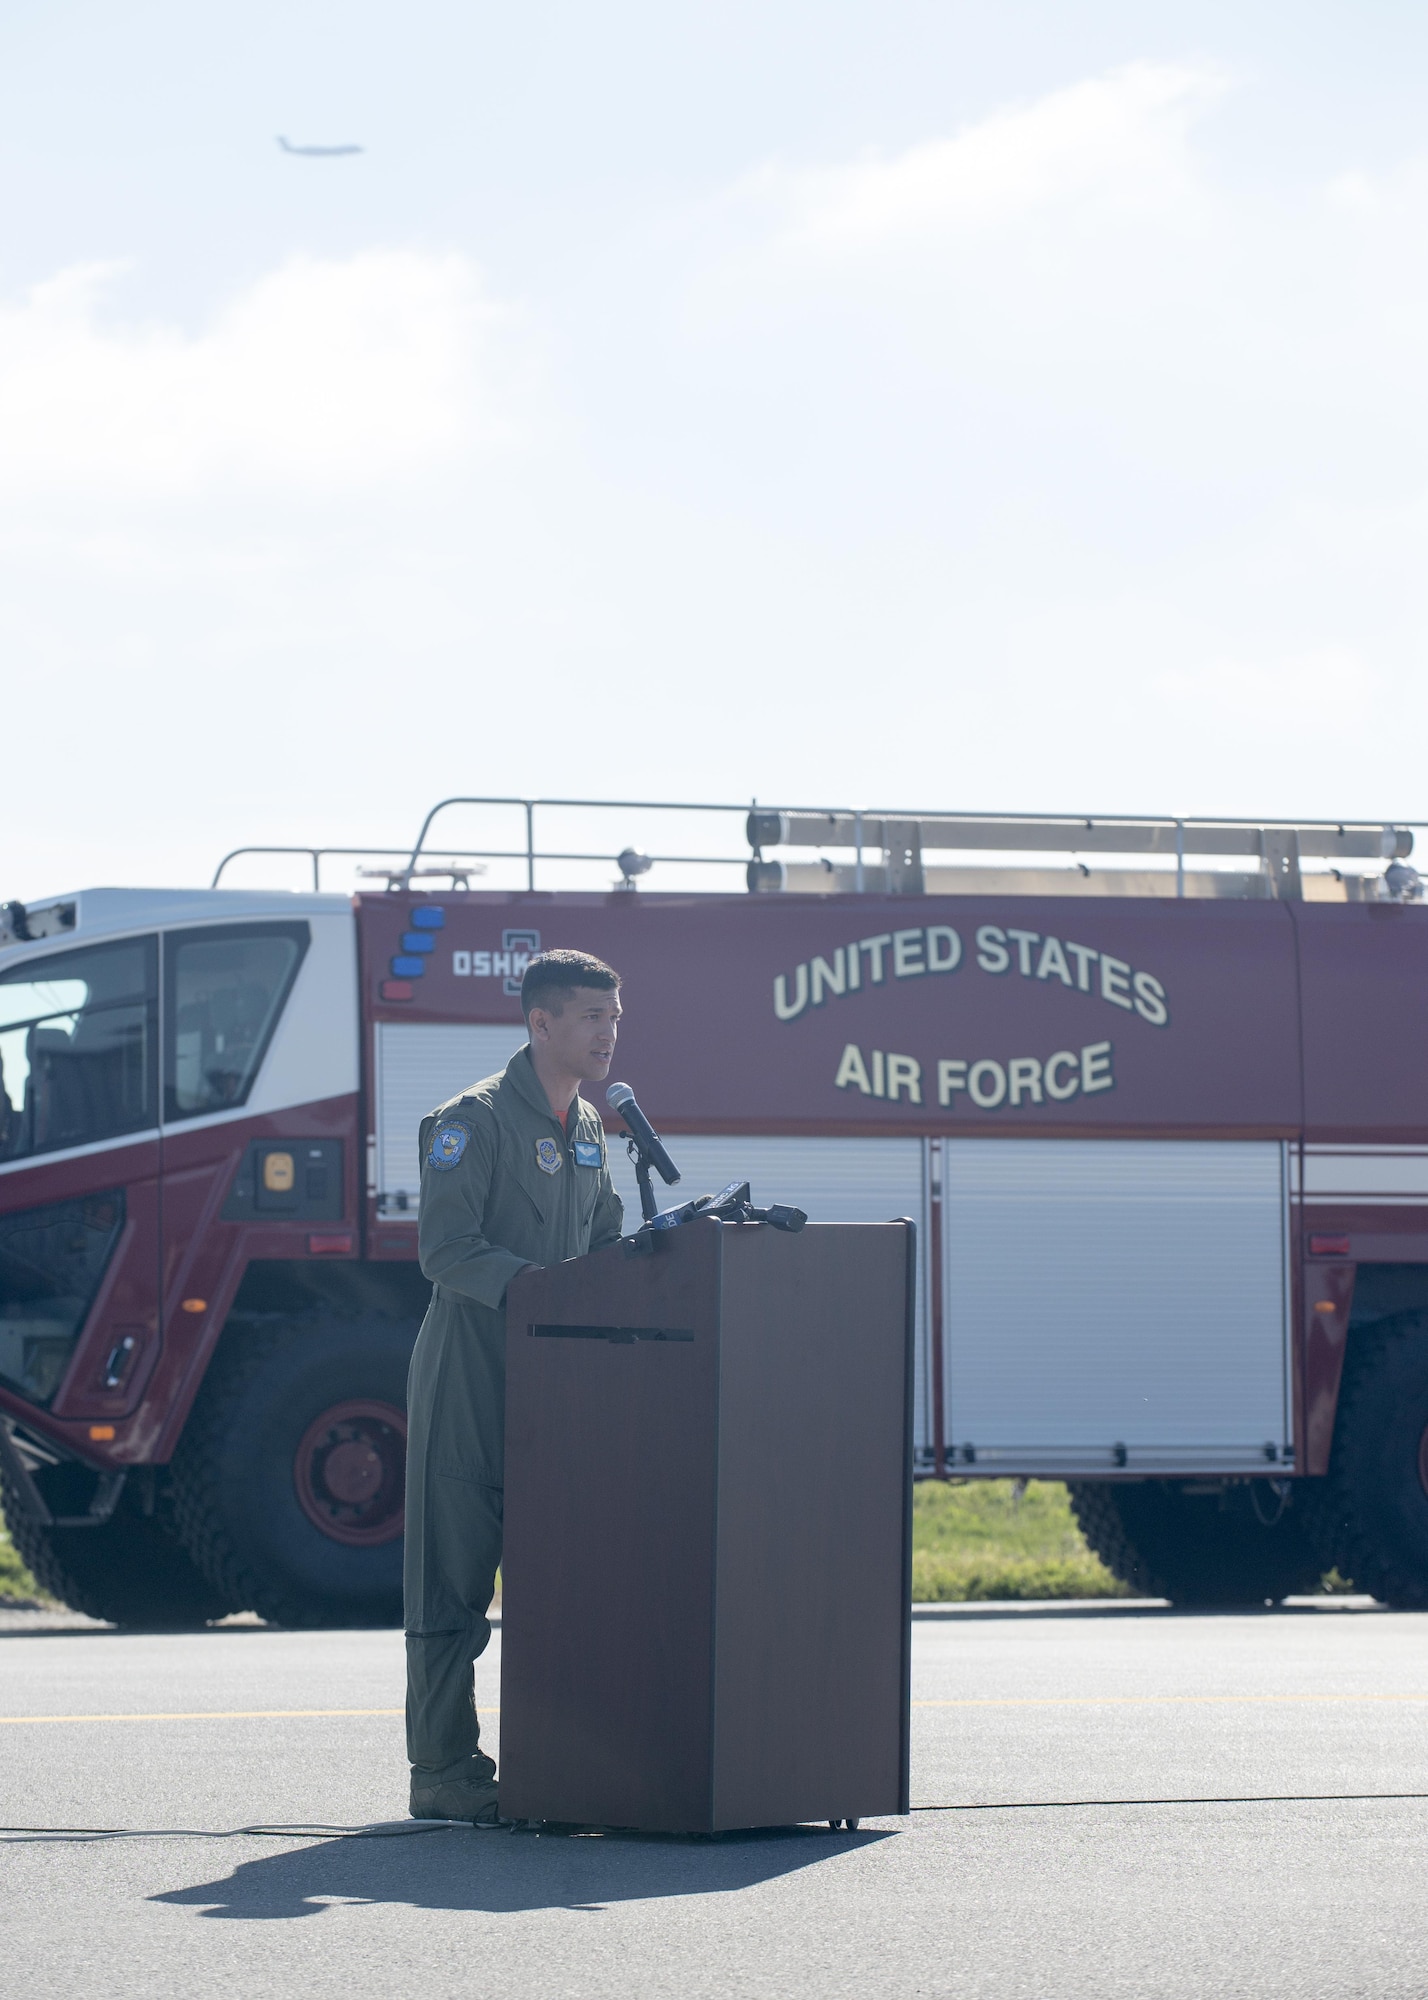 Capt. Jose Hinojosa, 9th Airlift Squadron pilot, speaks during a ribbon cutting ceremony for Runway 01-19 Sept. 23, 2016, on Dover Air Force Base, Del. Hinojosa narrated the ceremony, which marked the opening of runway 01-19, returning C-5M Super Galaxy operations from Joint Base McGuire-Dix-Lakehurst, N.J. (U.S. Air Force photo by Staff Sgt. Jared Duhon) 